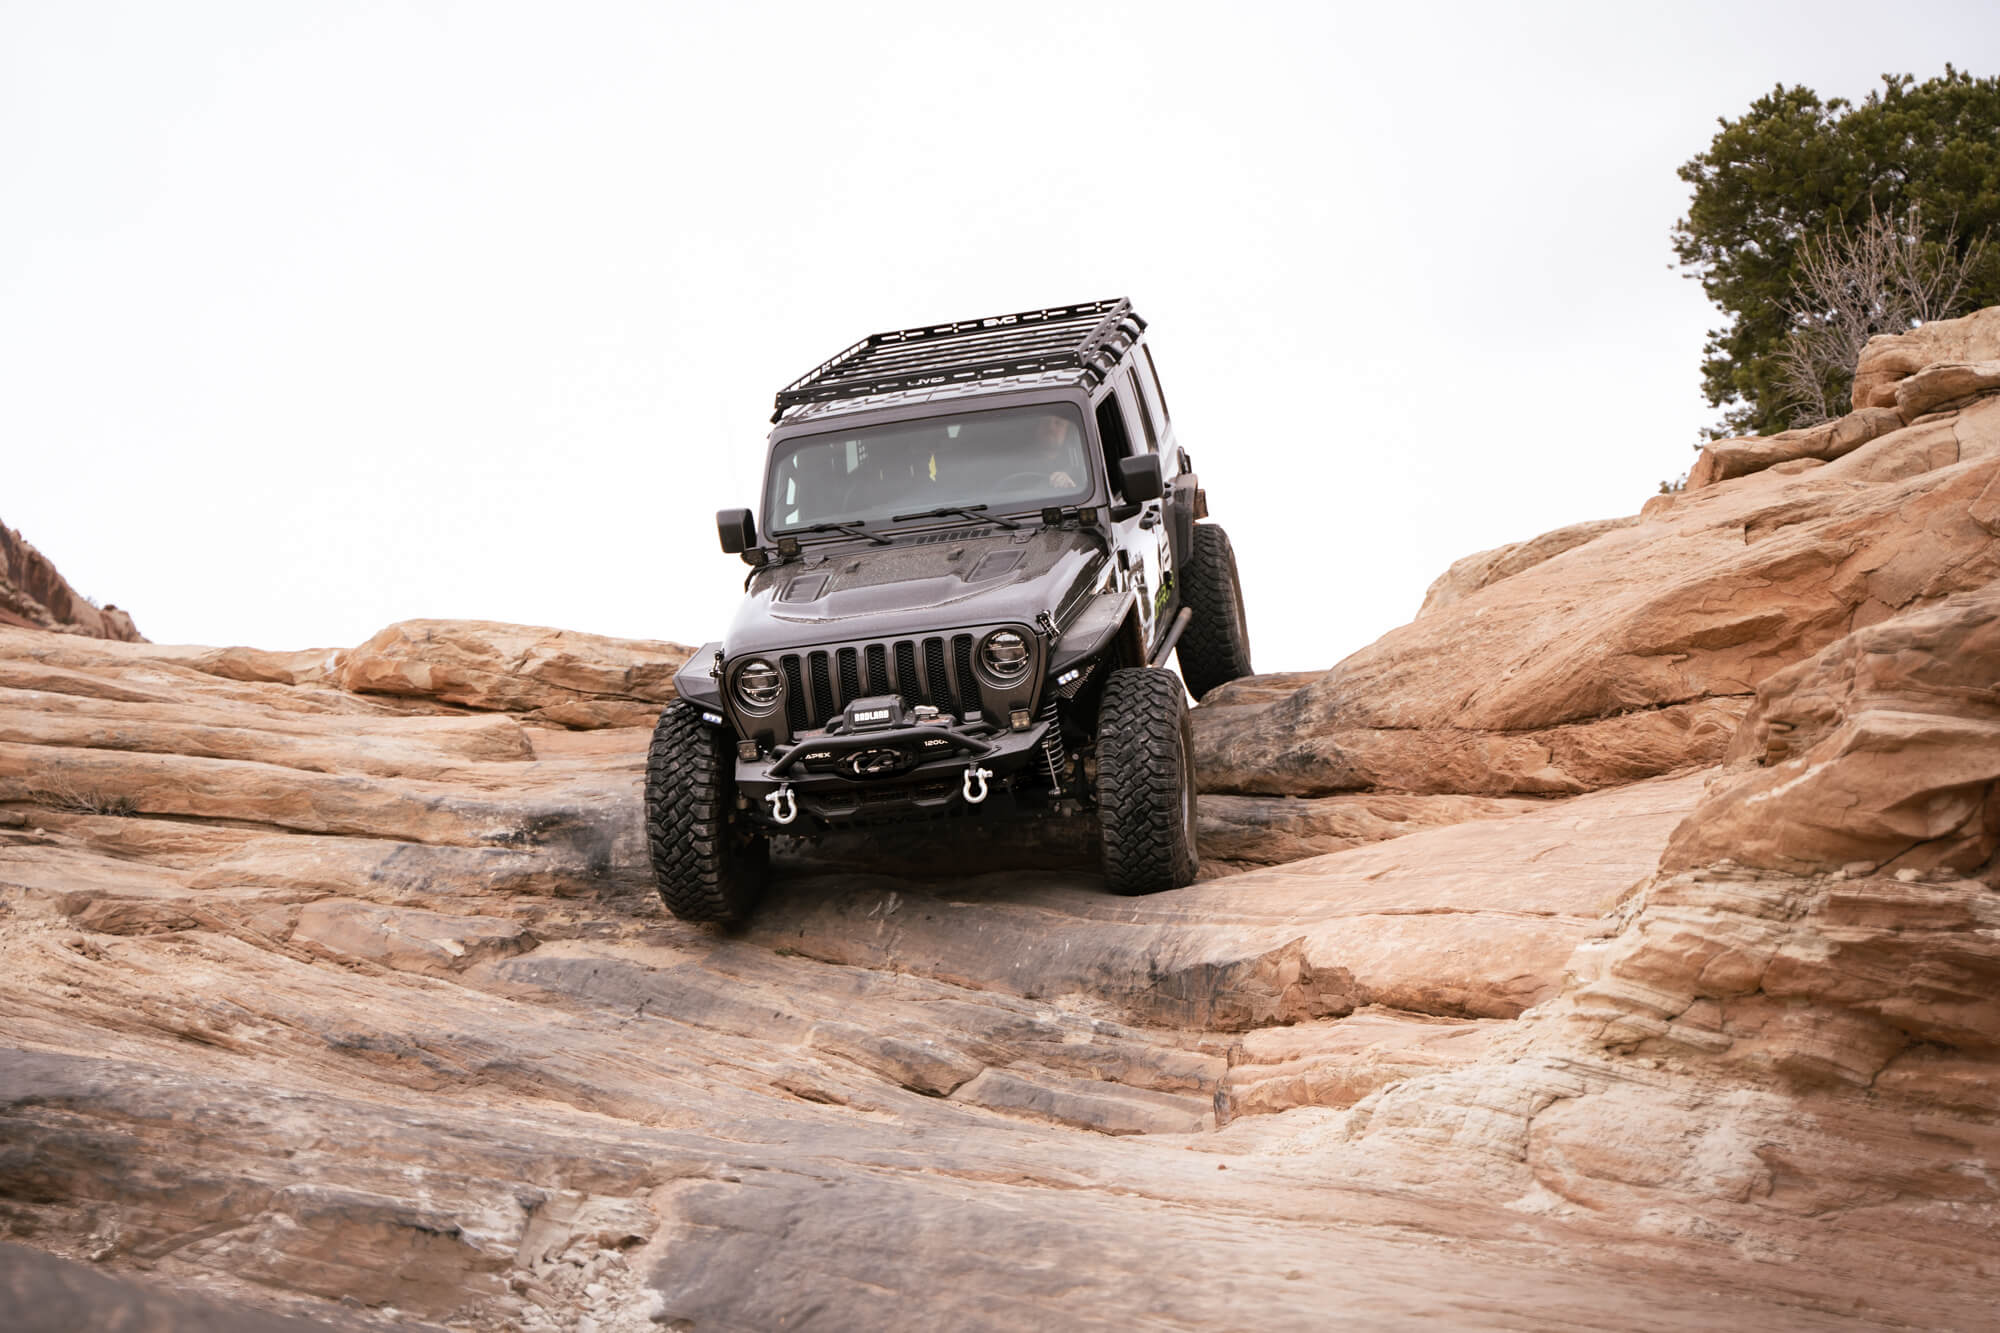 Jeep Wrangler on Wipeout Hill in Moab Utah